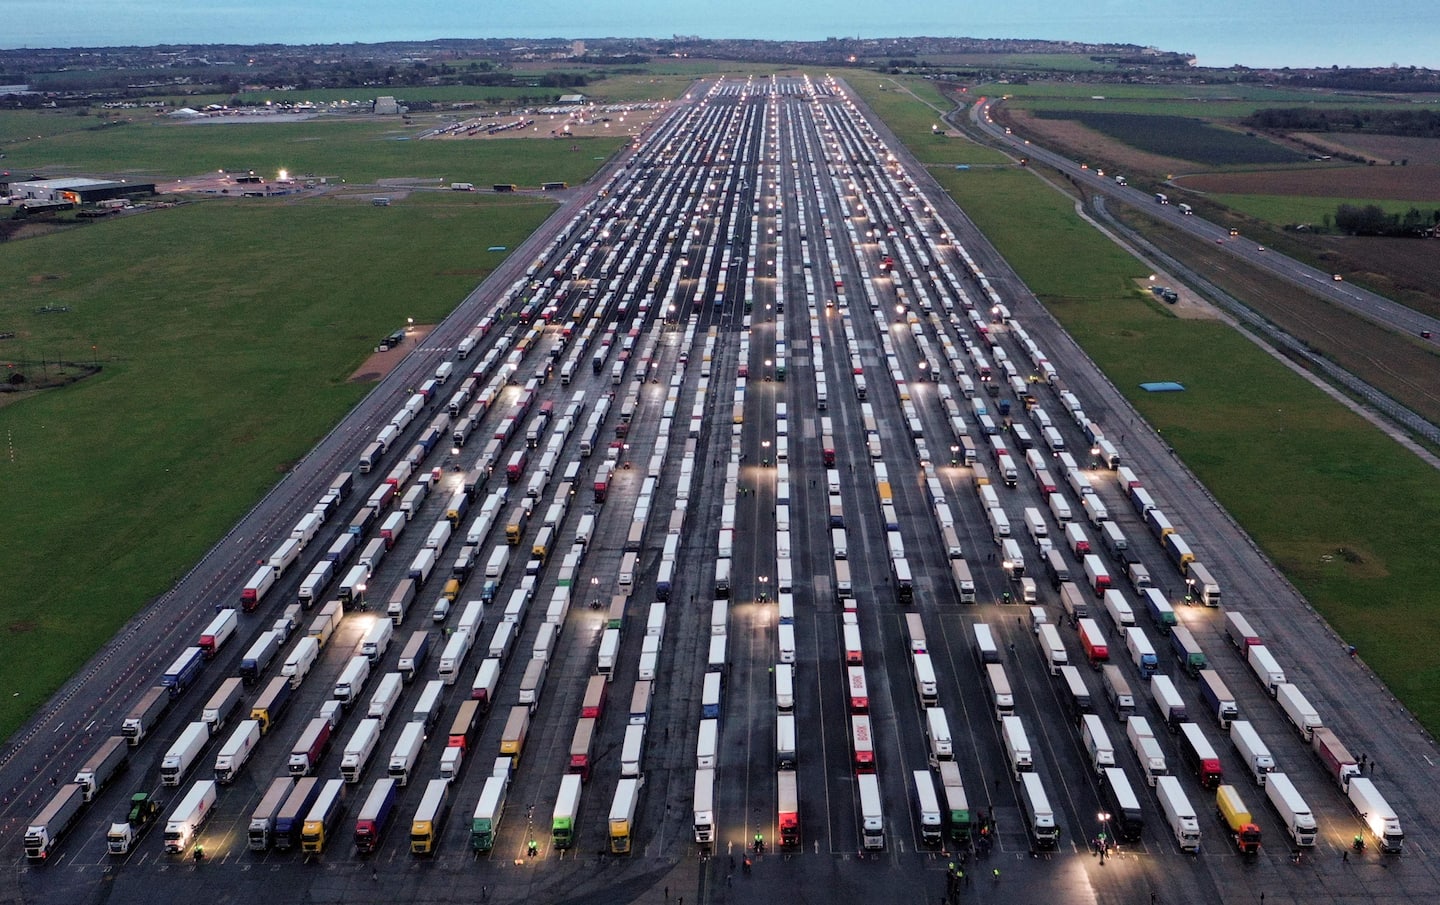 Thousands of trucks stranded in UK amid fears of corona virus mutation despite France allowing reopening of limited border

